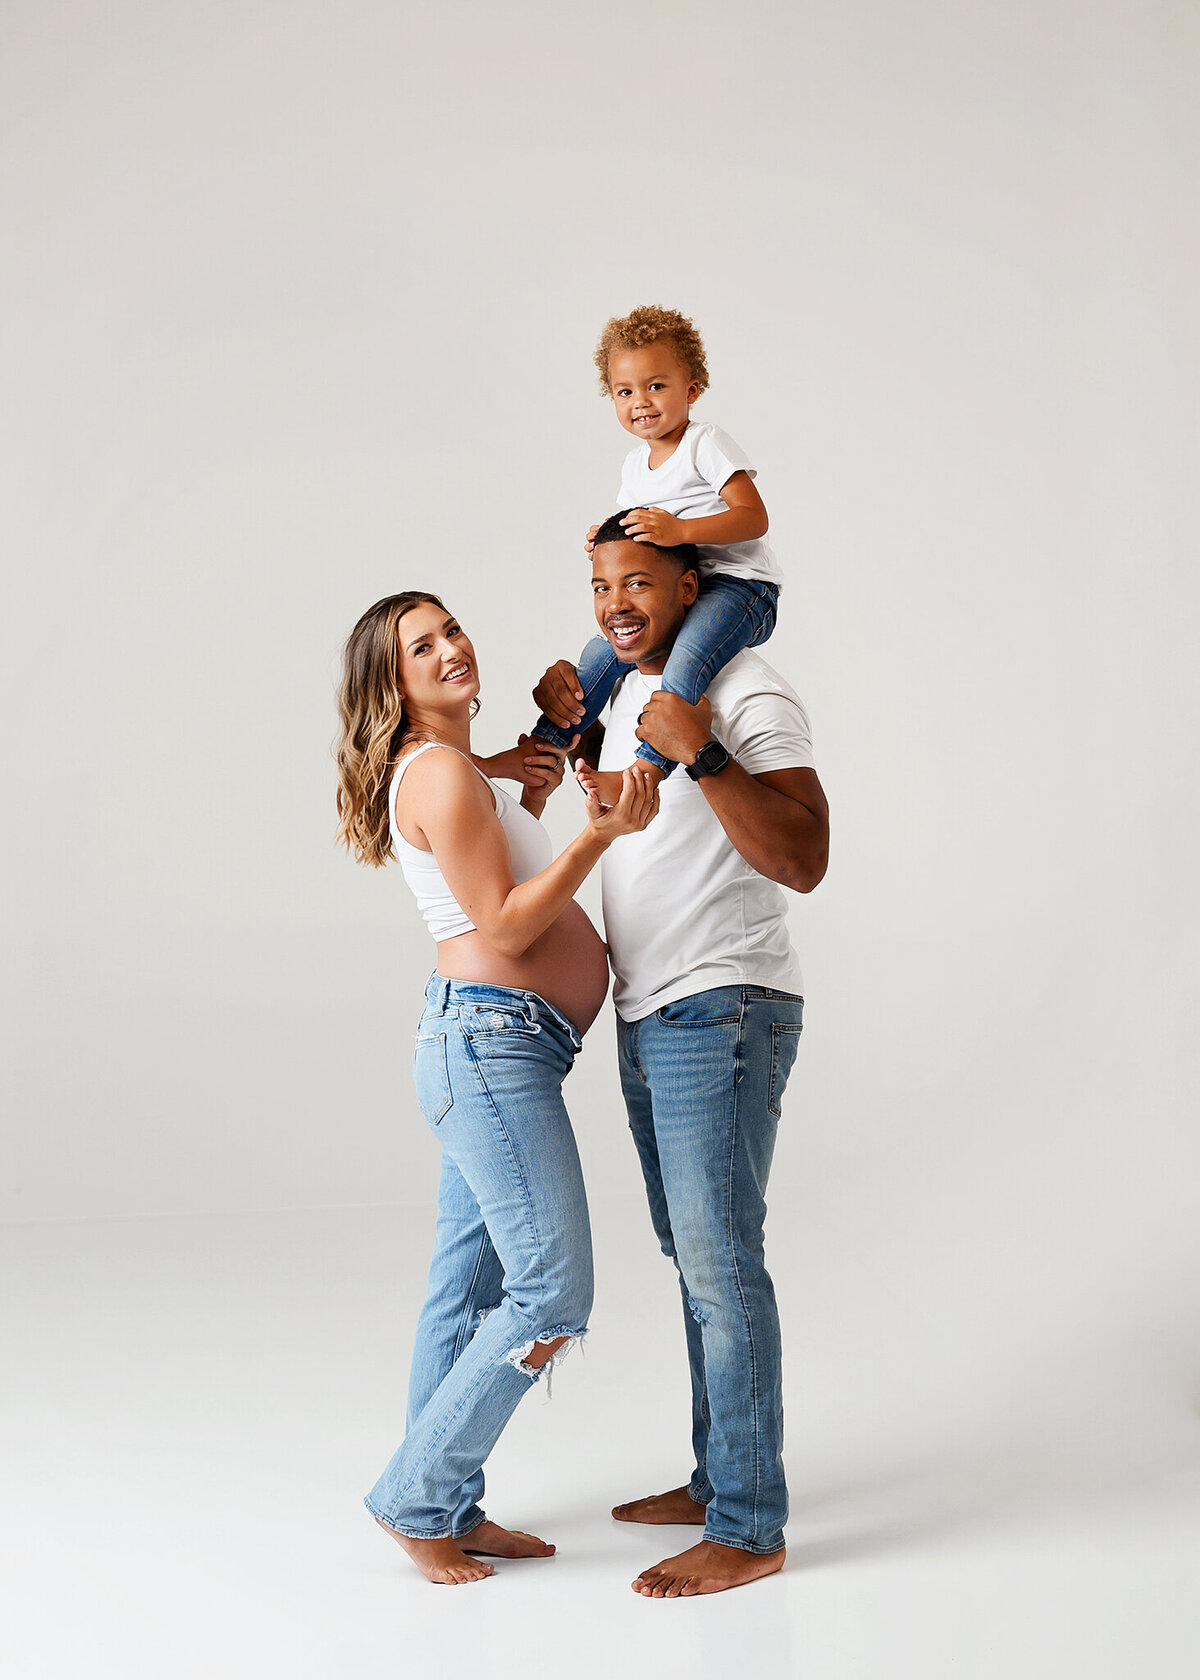 Smiling mom and dad, with toddler on dad's shoulders looking at the camera wearing white shirts and jeans against plain white background with baby bum showing, in Chandler Maternity studio